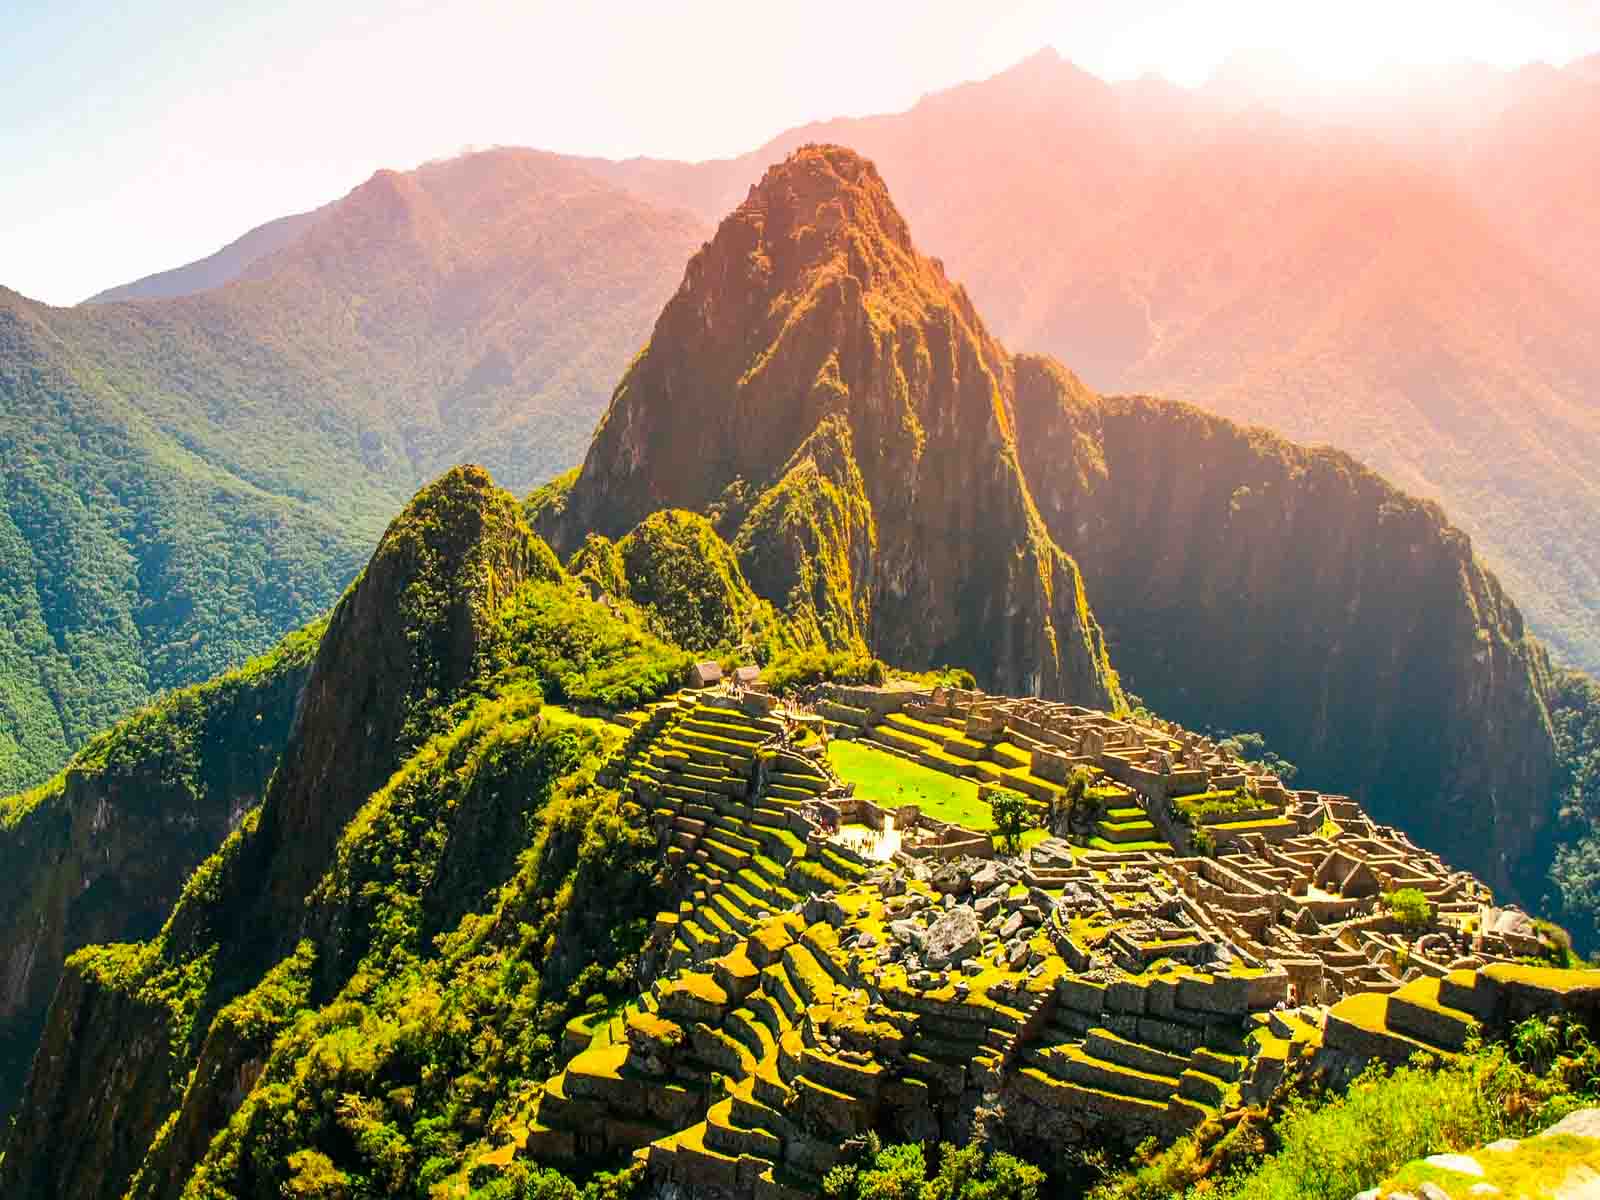  Peru | The best time to visit Machu Picchu | All you need to know about visiting Machu Picchu, Cuzco and the Sacred Valley